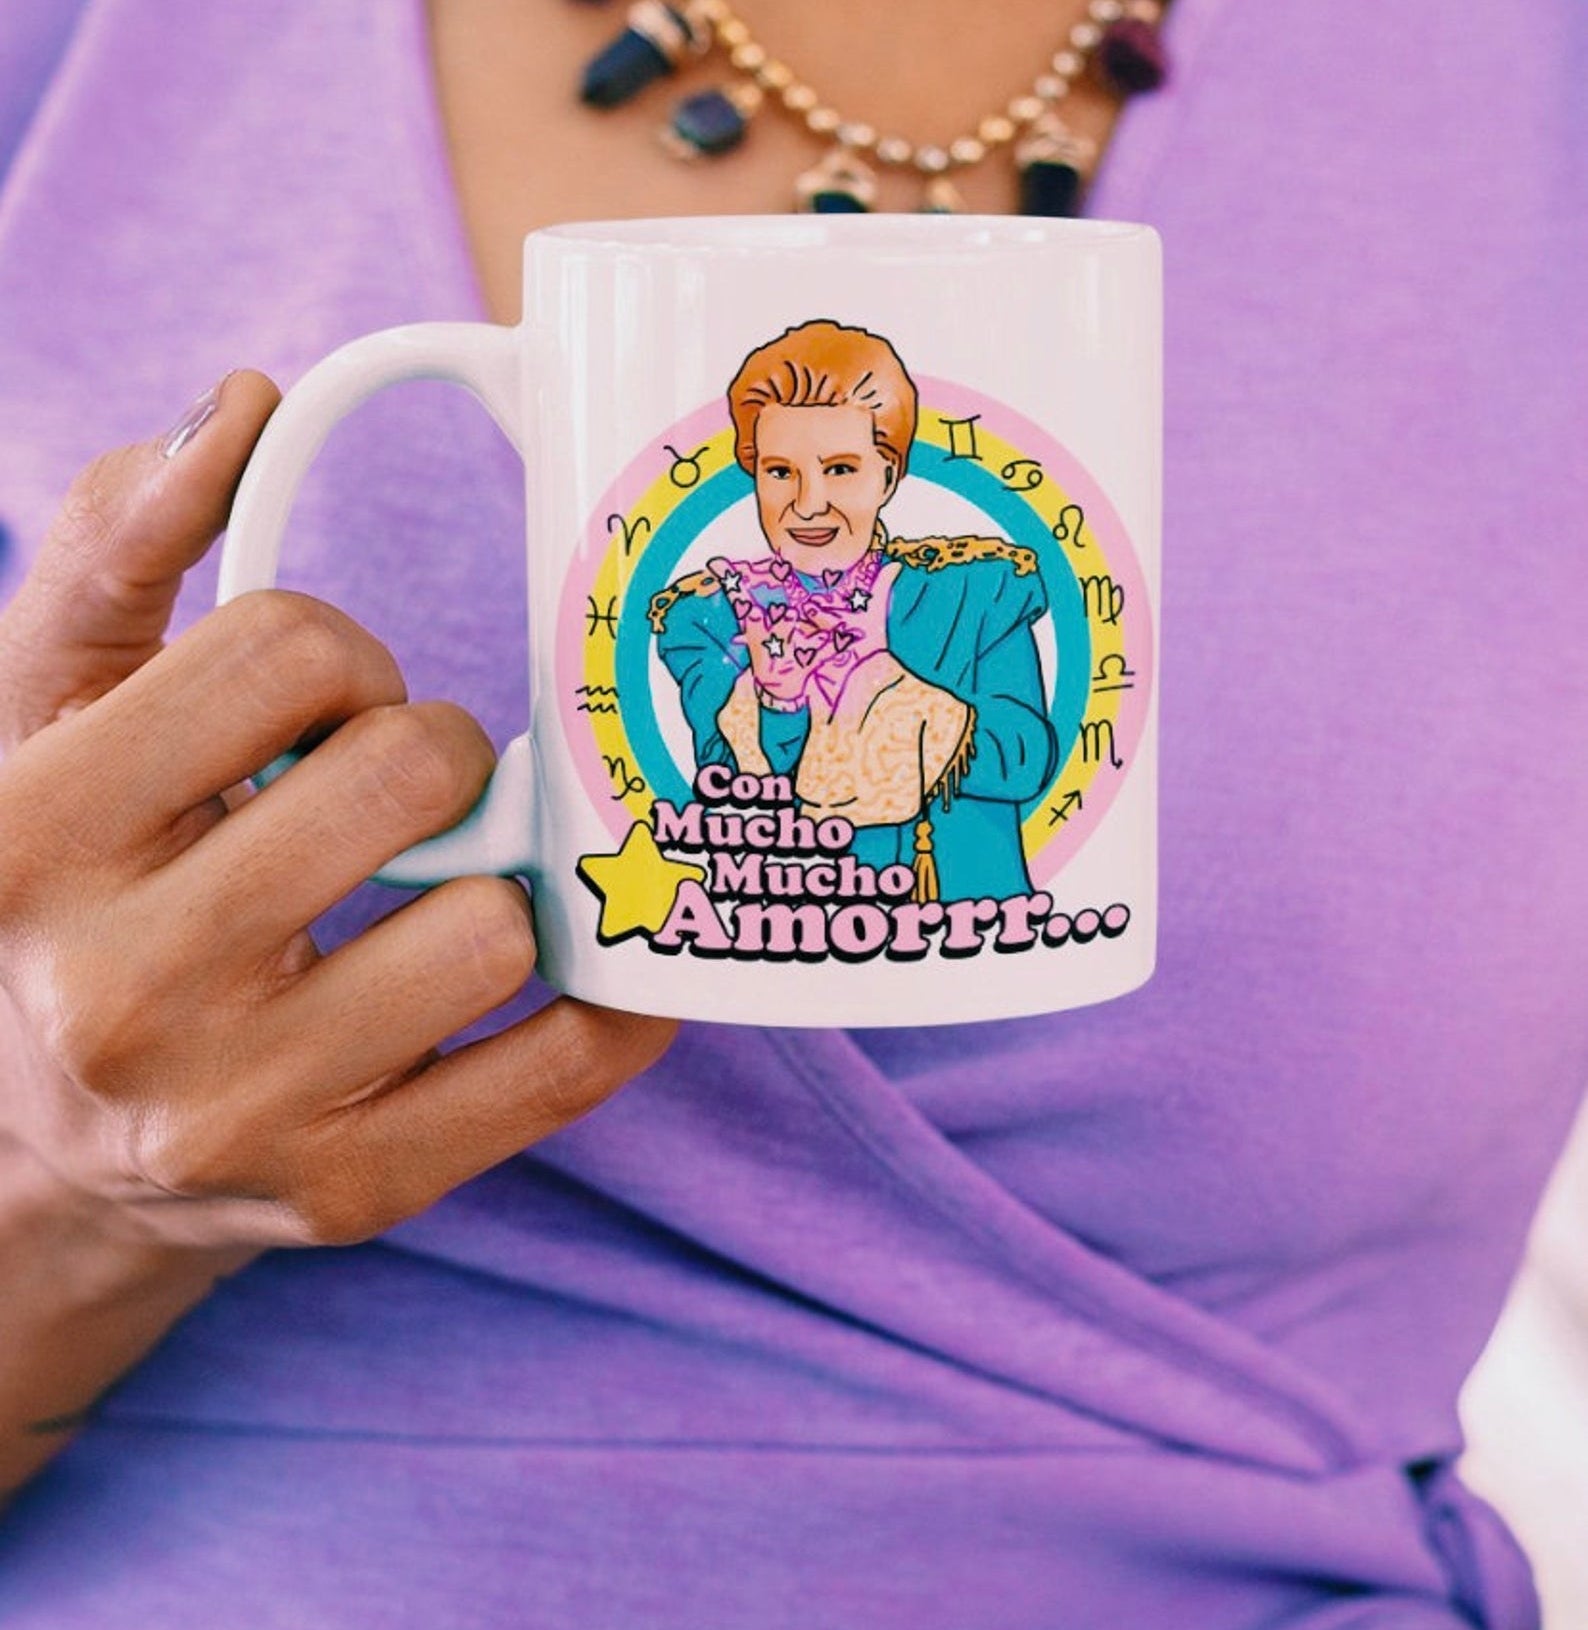 Model holding a white coffee mug with a colorful illustration of Walter Mercado 